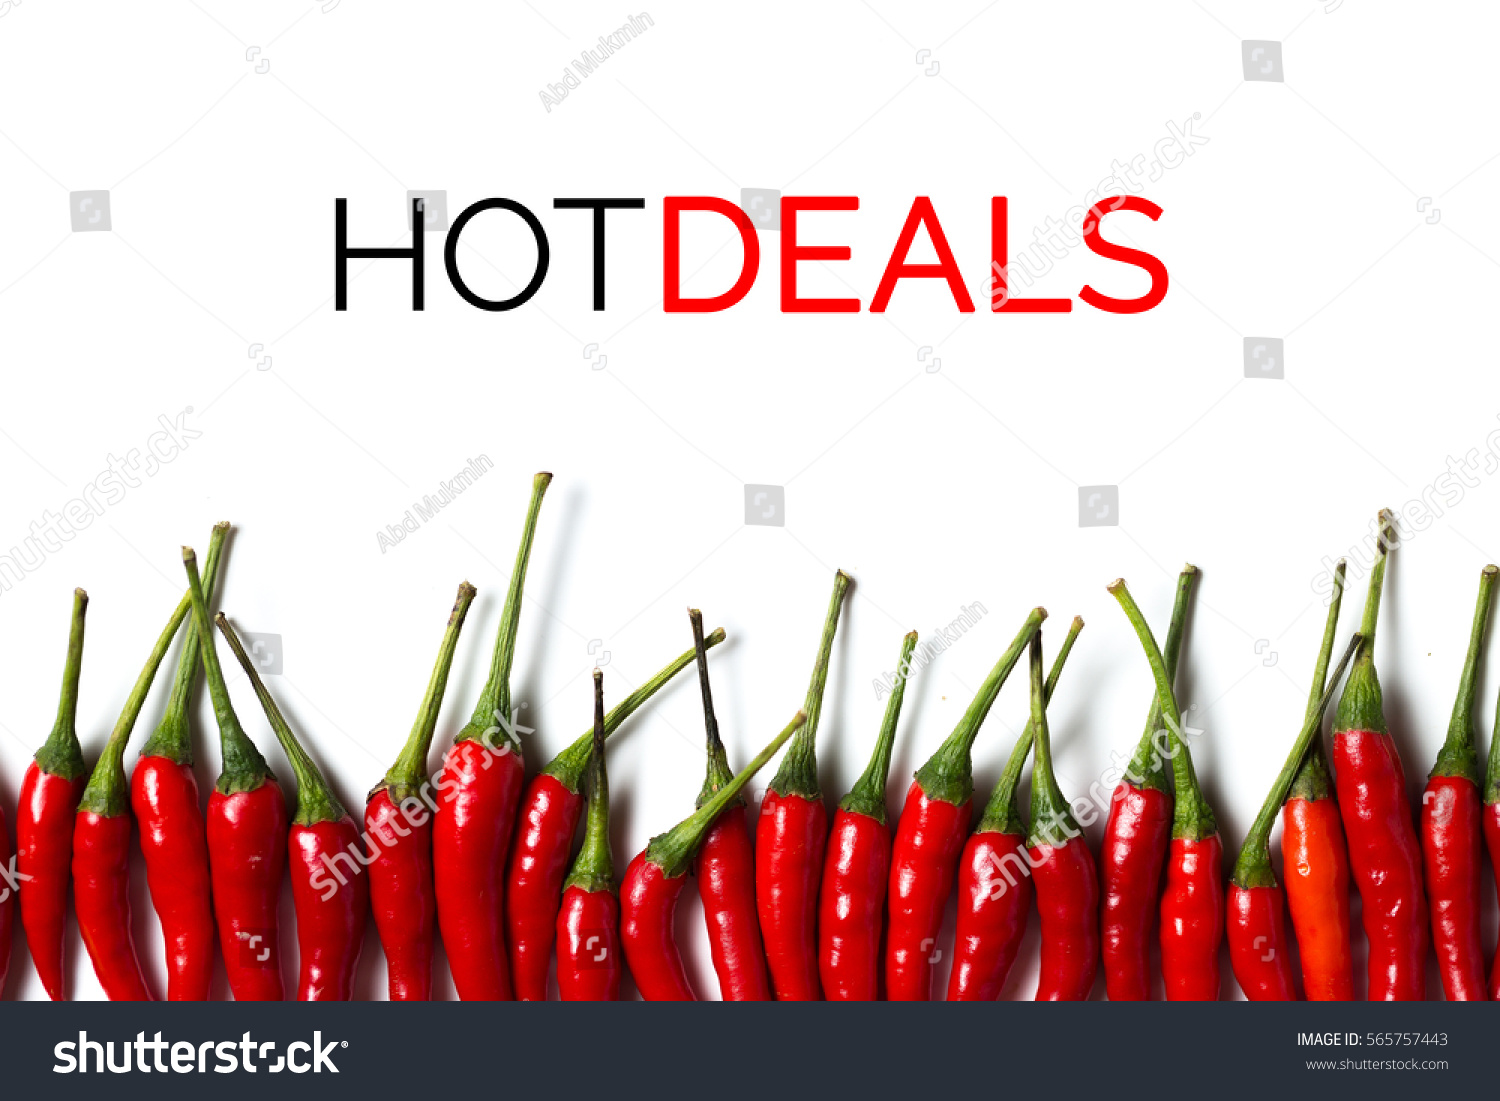 A Lay Flat Chillies Isolated Over White Background With Word Title Hot Deals